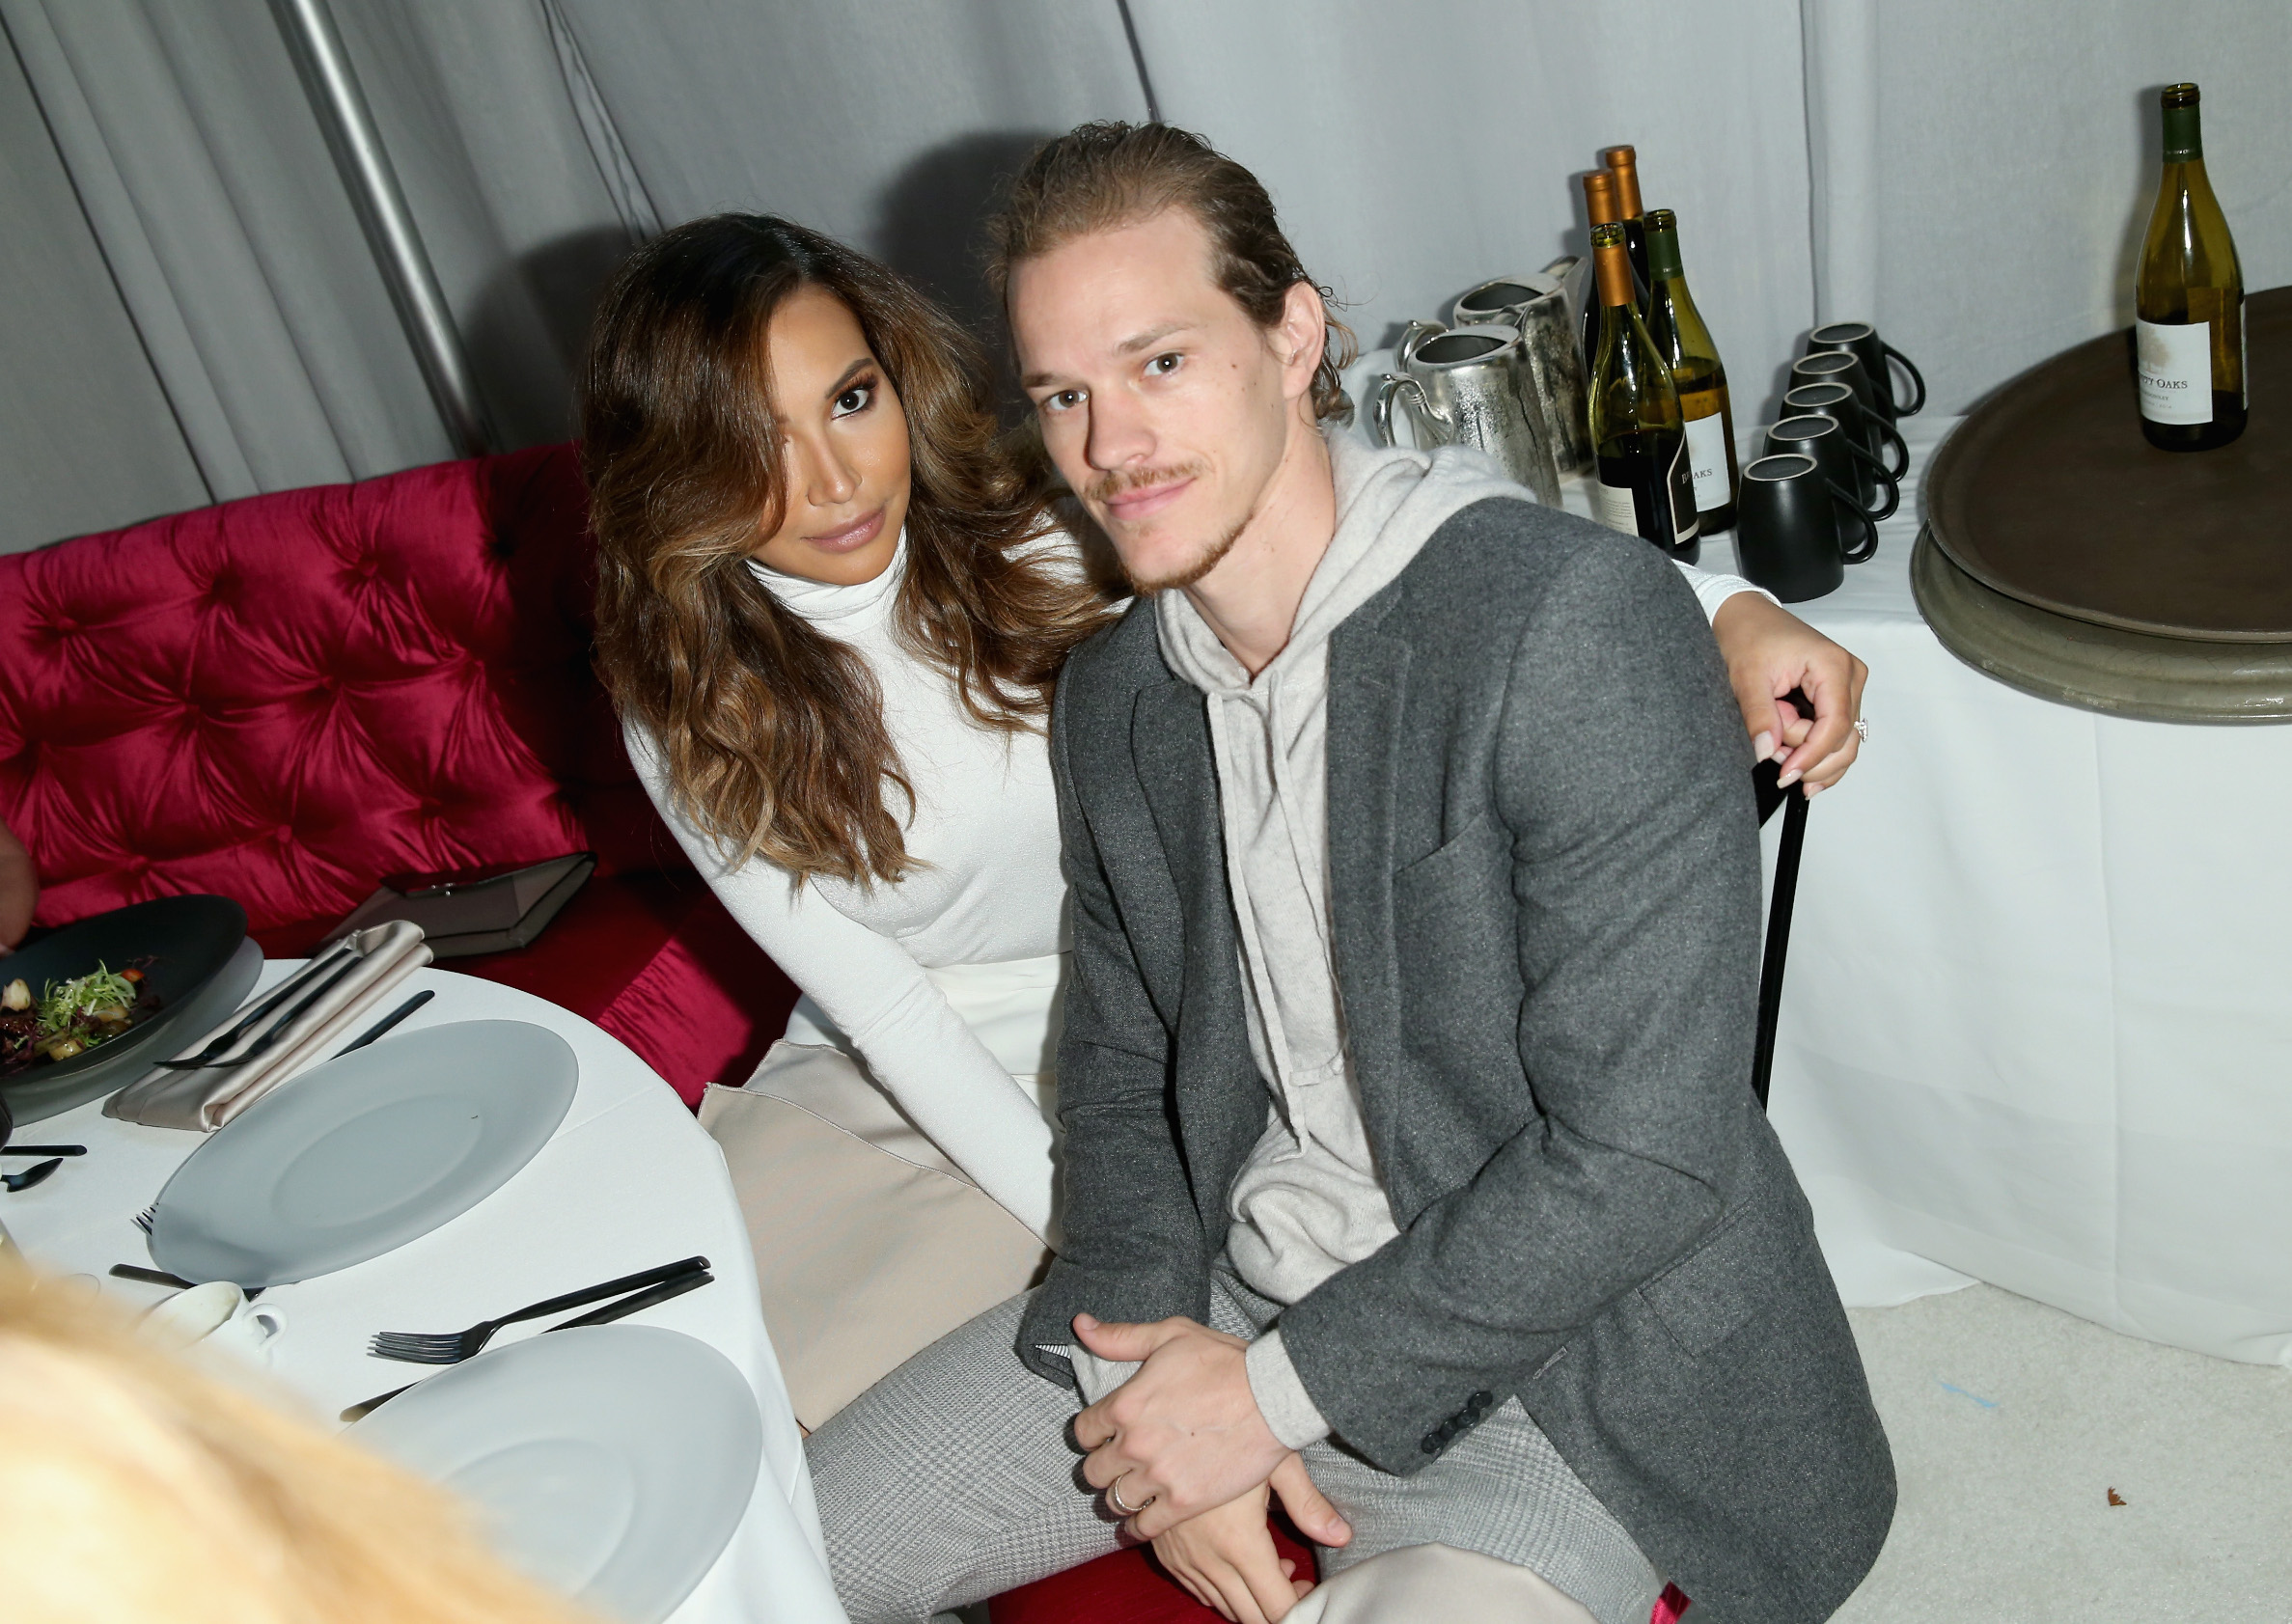 BEVERLY HILLS, CA - DECEMBER 04:  Actors Naya Rivera (L) and Ryan Dorsey attend the March Of Dimes Celebration Of Babies Luncheon honoring Jessica Alba at the Beverly Wilshire Four Seasons Hotel on December 4, 2015 in Beverly Hills, California.  (Photo by Joe Scarnici/Getty Images for March Of Dimes)